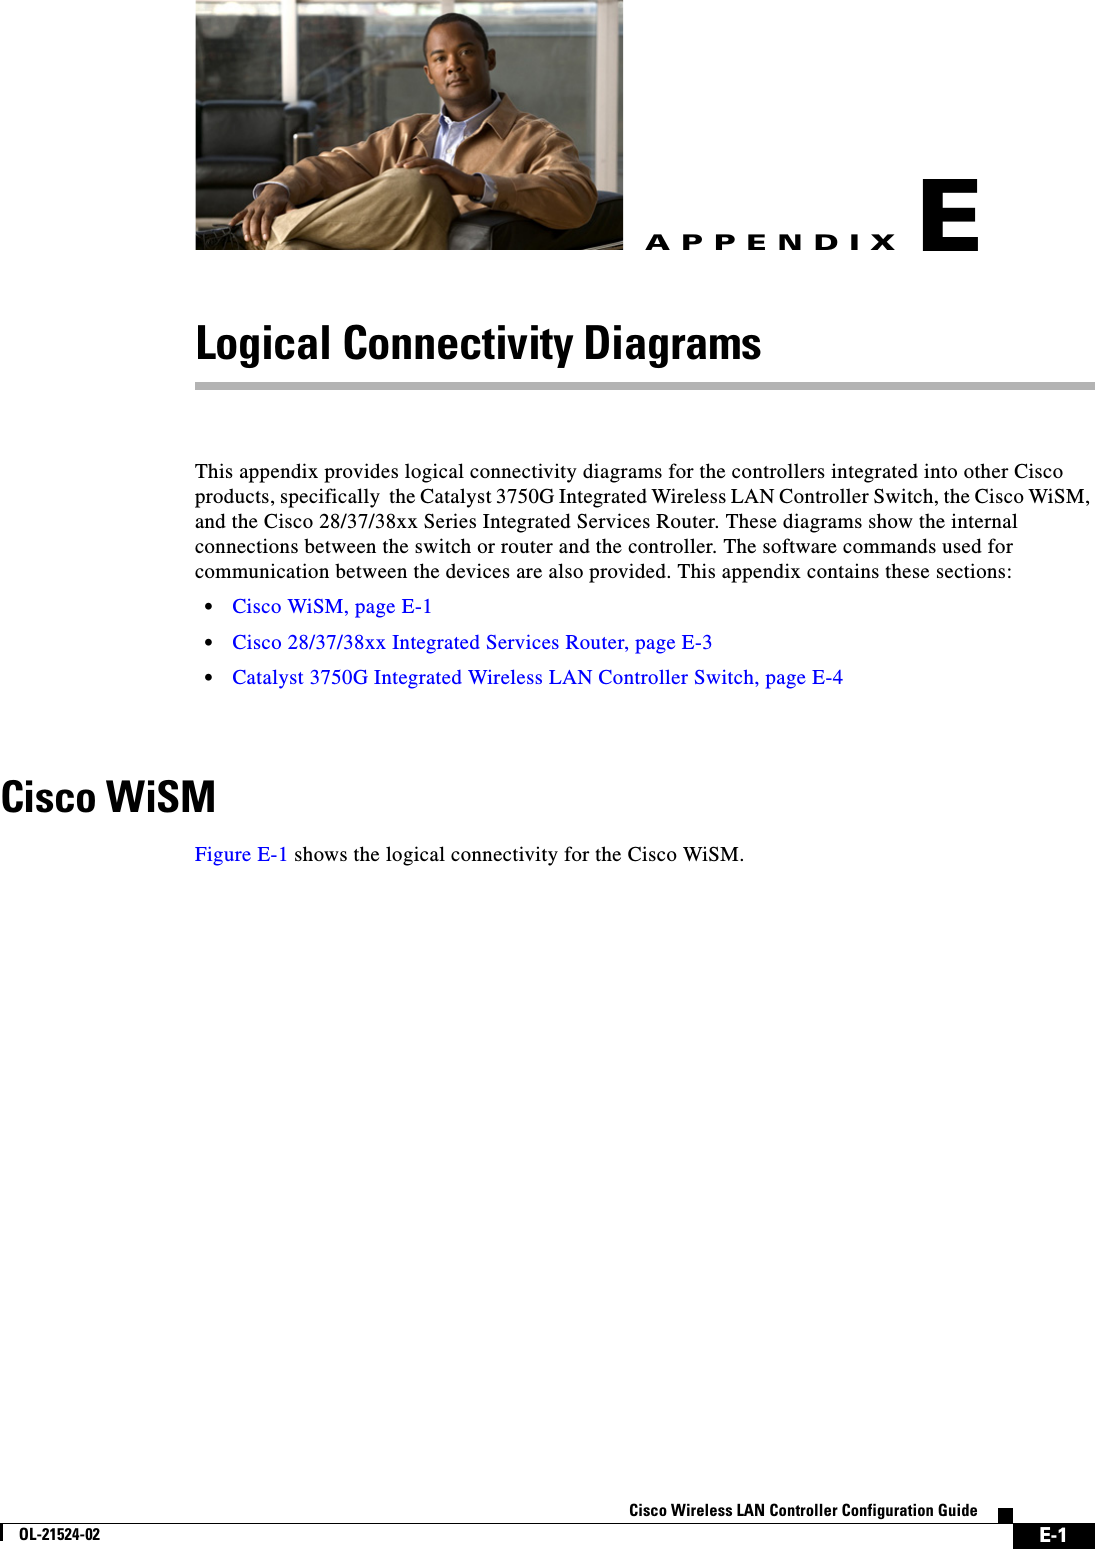  E-1Cisco Wireless LAN Controller Configuration GuideOL-21524-02APPENDIXELogical Connectivity DiagramsThis appendix provides logical connectivity diagrams for the controllers integrated into other Cisco products, specifically  the Catalyst 3750G Integrated Wireless LAN Controller Switch, the Cisco WiSM, and the Cisco 28/37/38xx Series Integrated Services Router. These diagrams show the internal connections between the switch or router and the controller. The software commands used for communication between the devices are also provided. This appendix contains these sections:  • Cisco WiSM, page E-1  • Cisco 28/37/38xx Integrated Services Router, page E-3  • Catalyst 3750G Integrated Wireless LAN Controller Switch, page E-4Cisco WiSMFigure E-1 shows the logical connectivity for the Cisco WiSM.